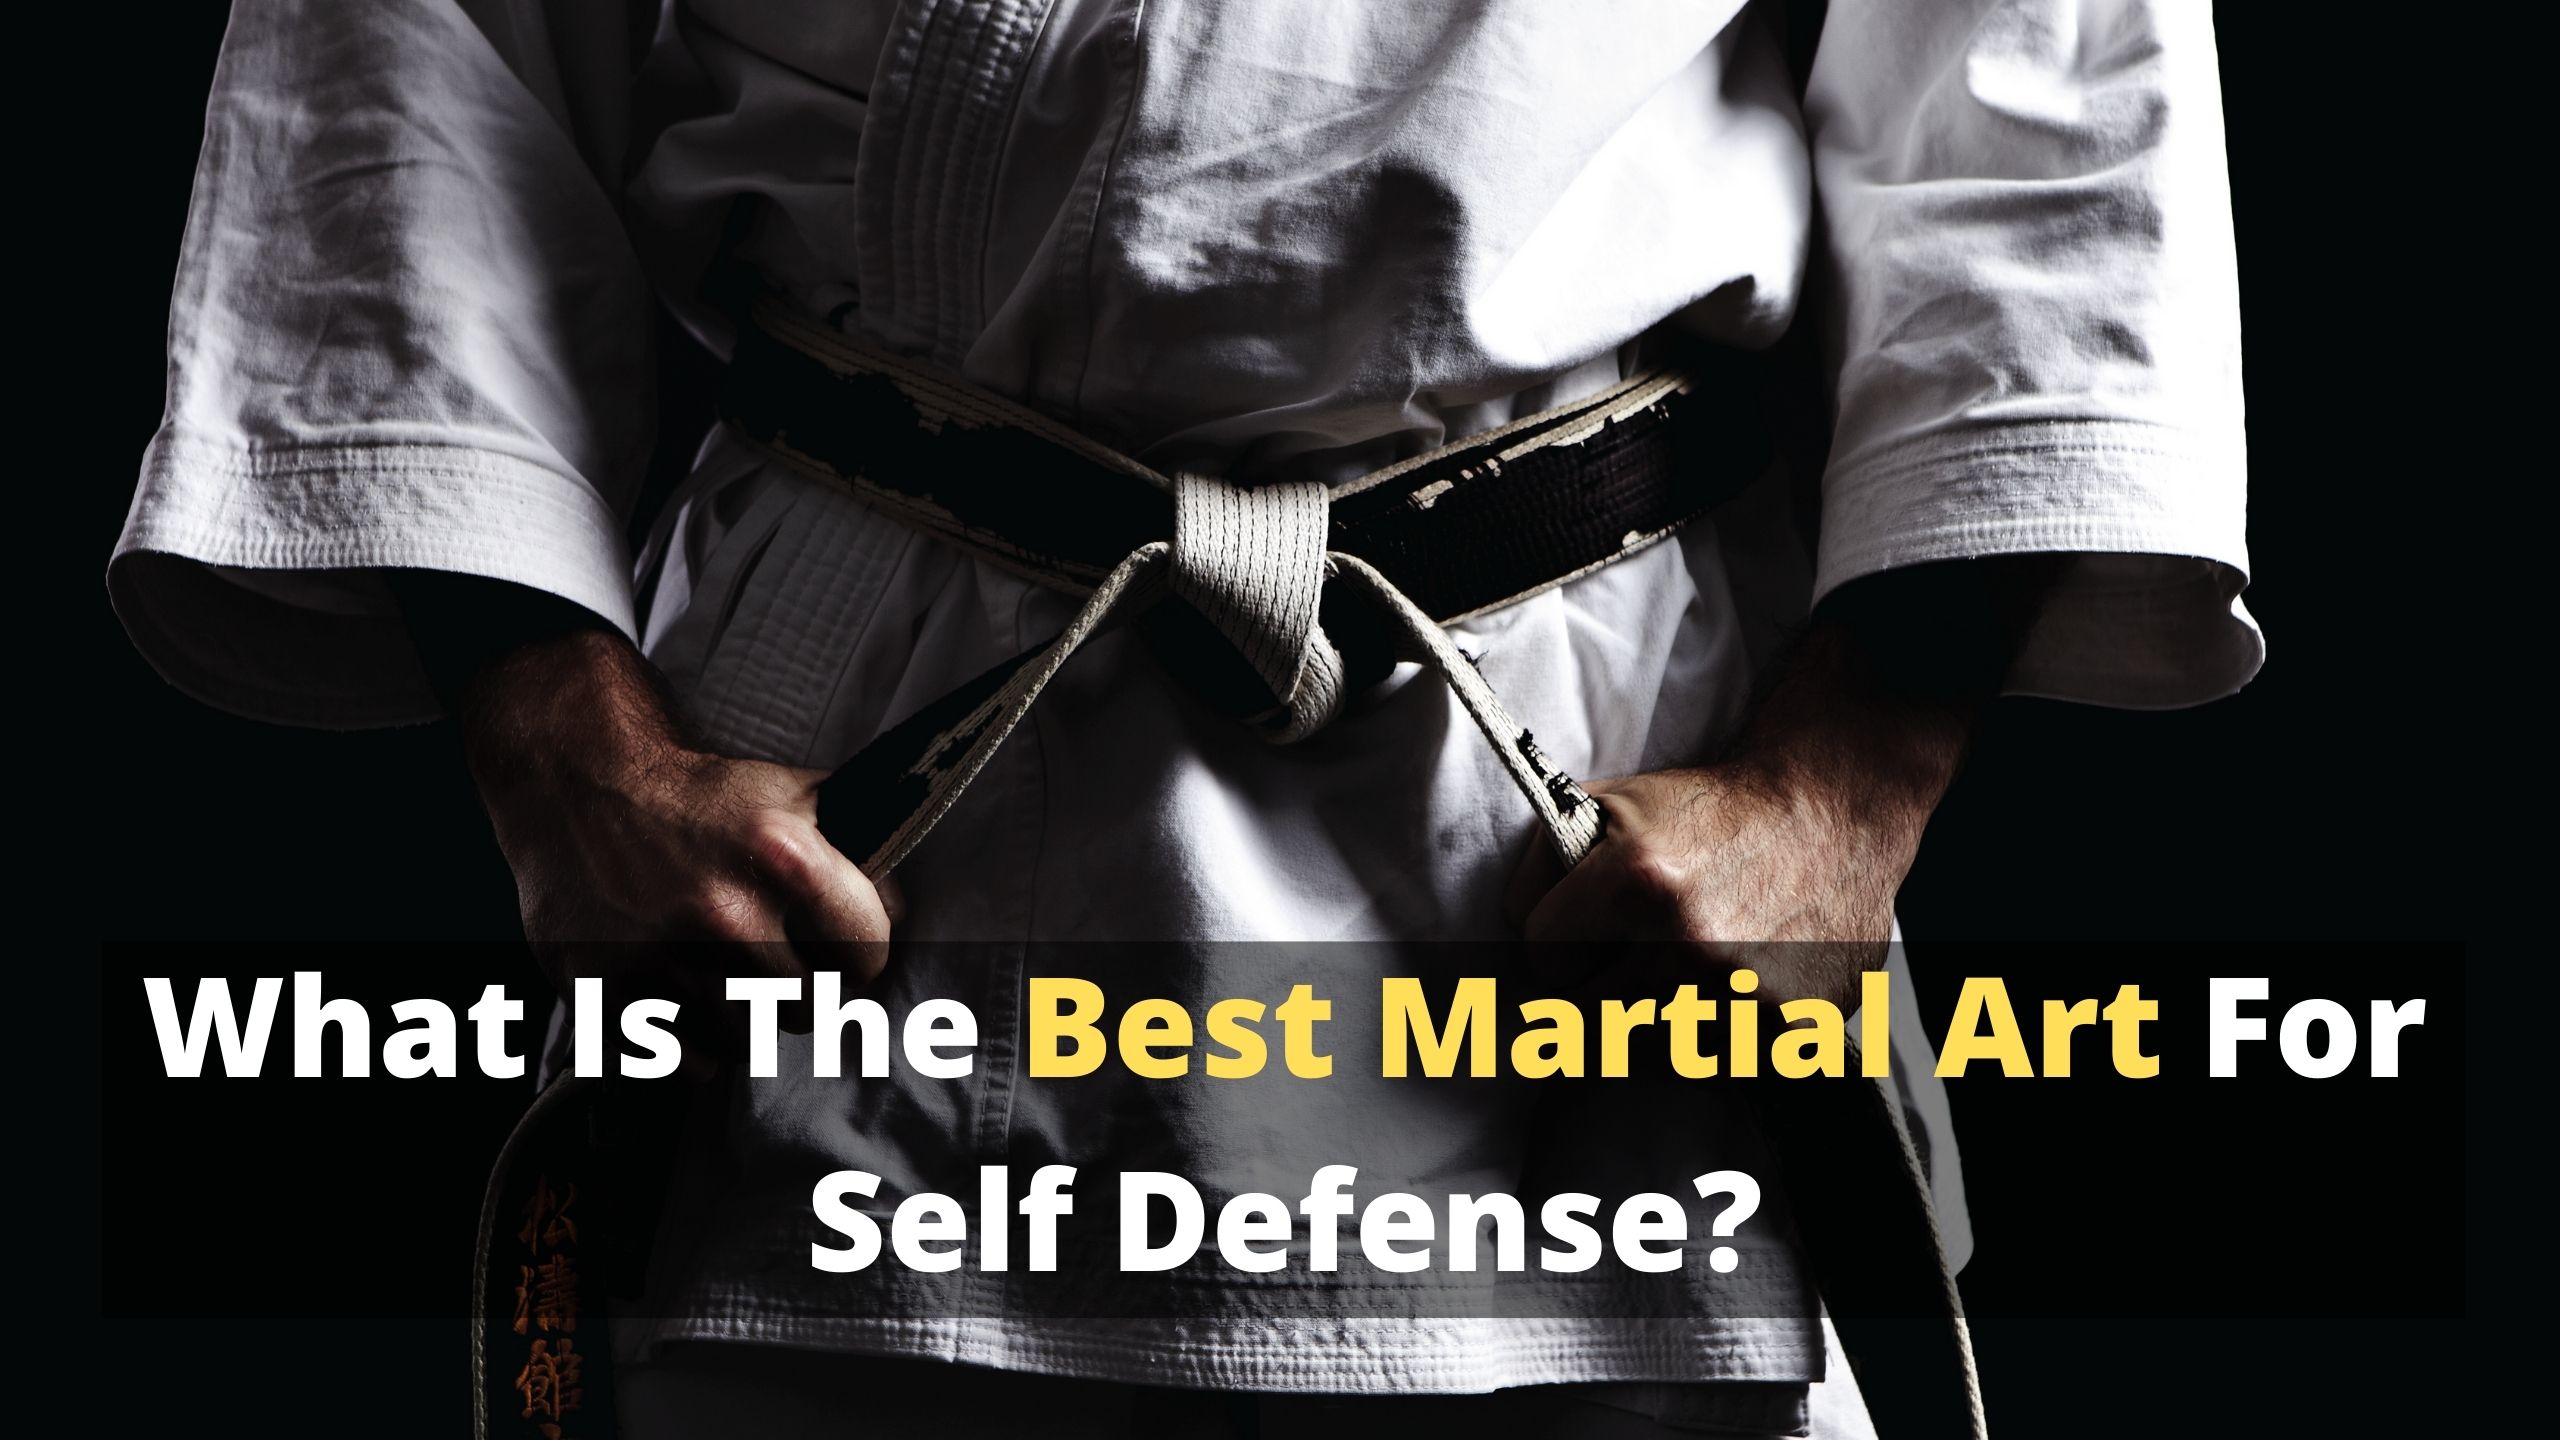 What Is The Best Martial Art For Self Defense